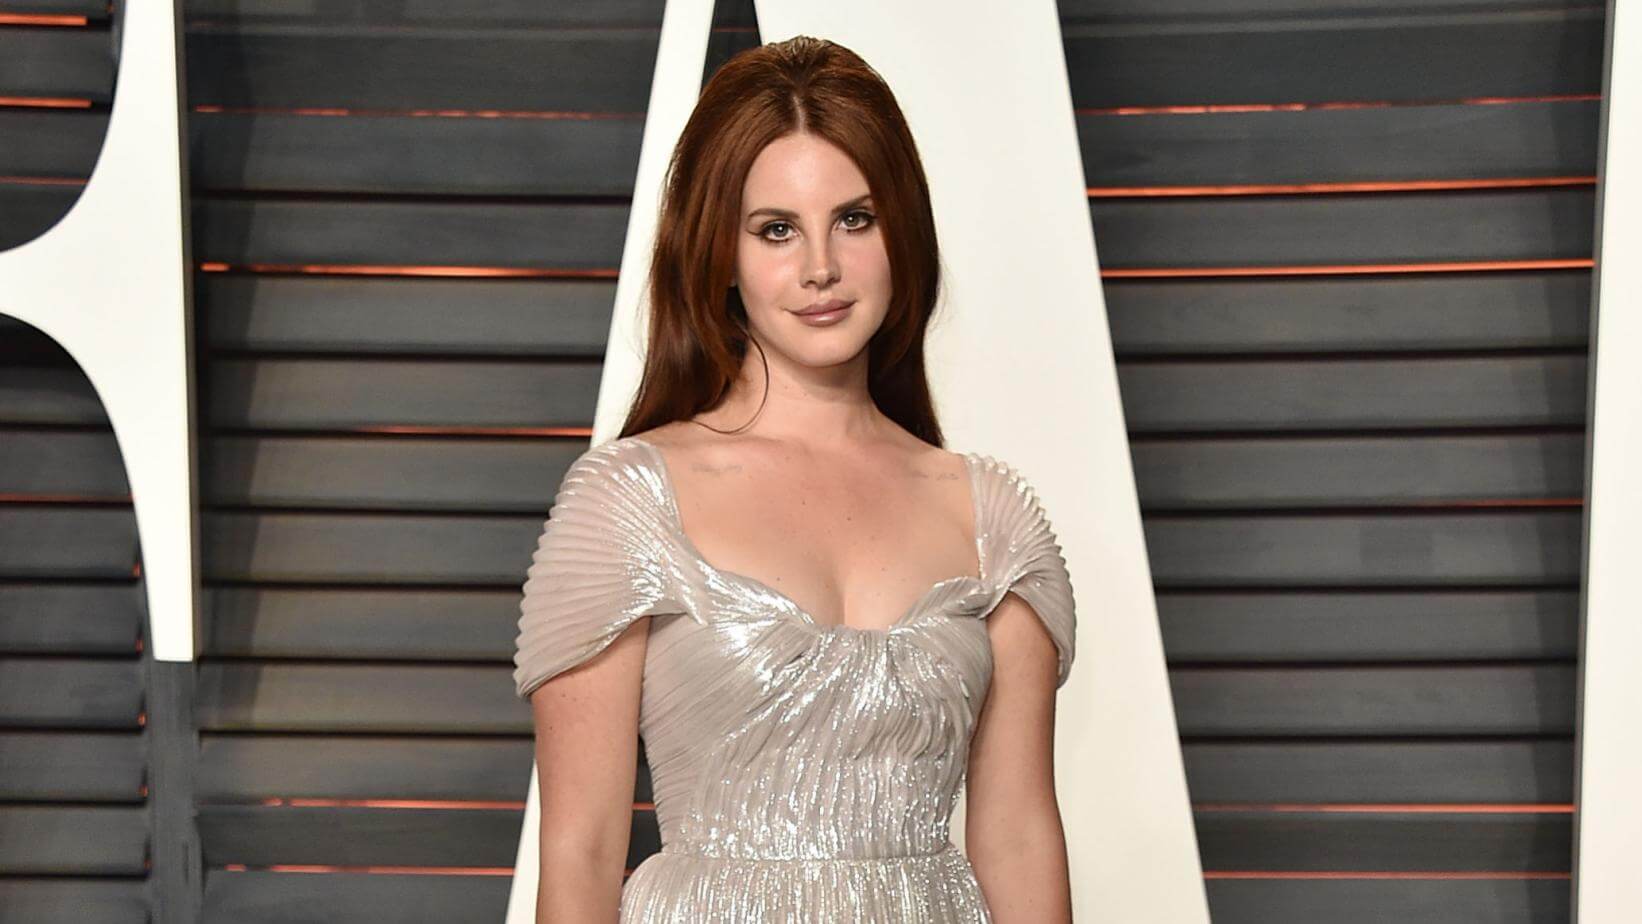 Lana Del Rey did the right thing - Mondoweiss